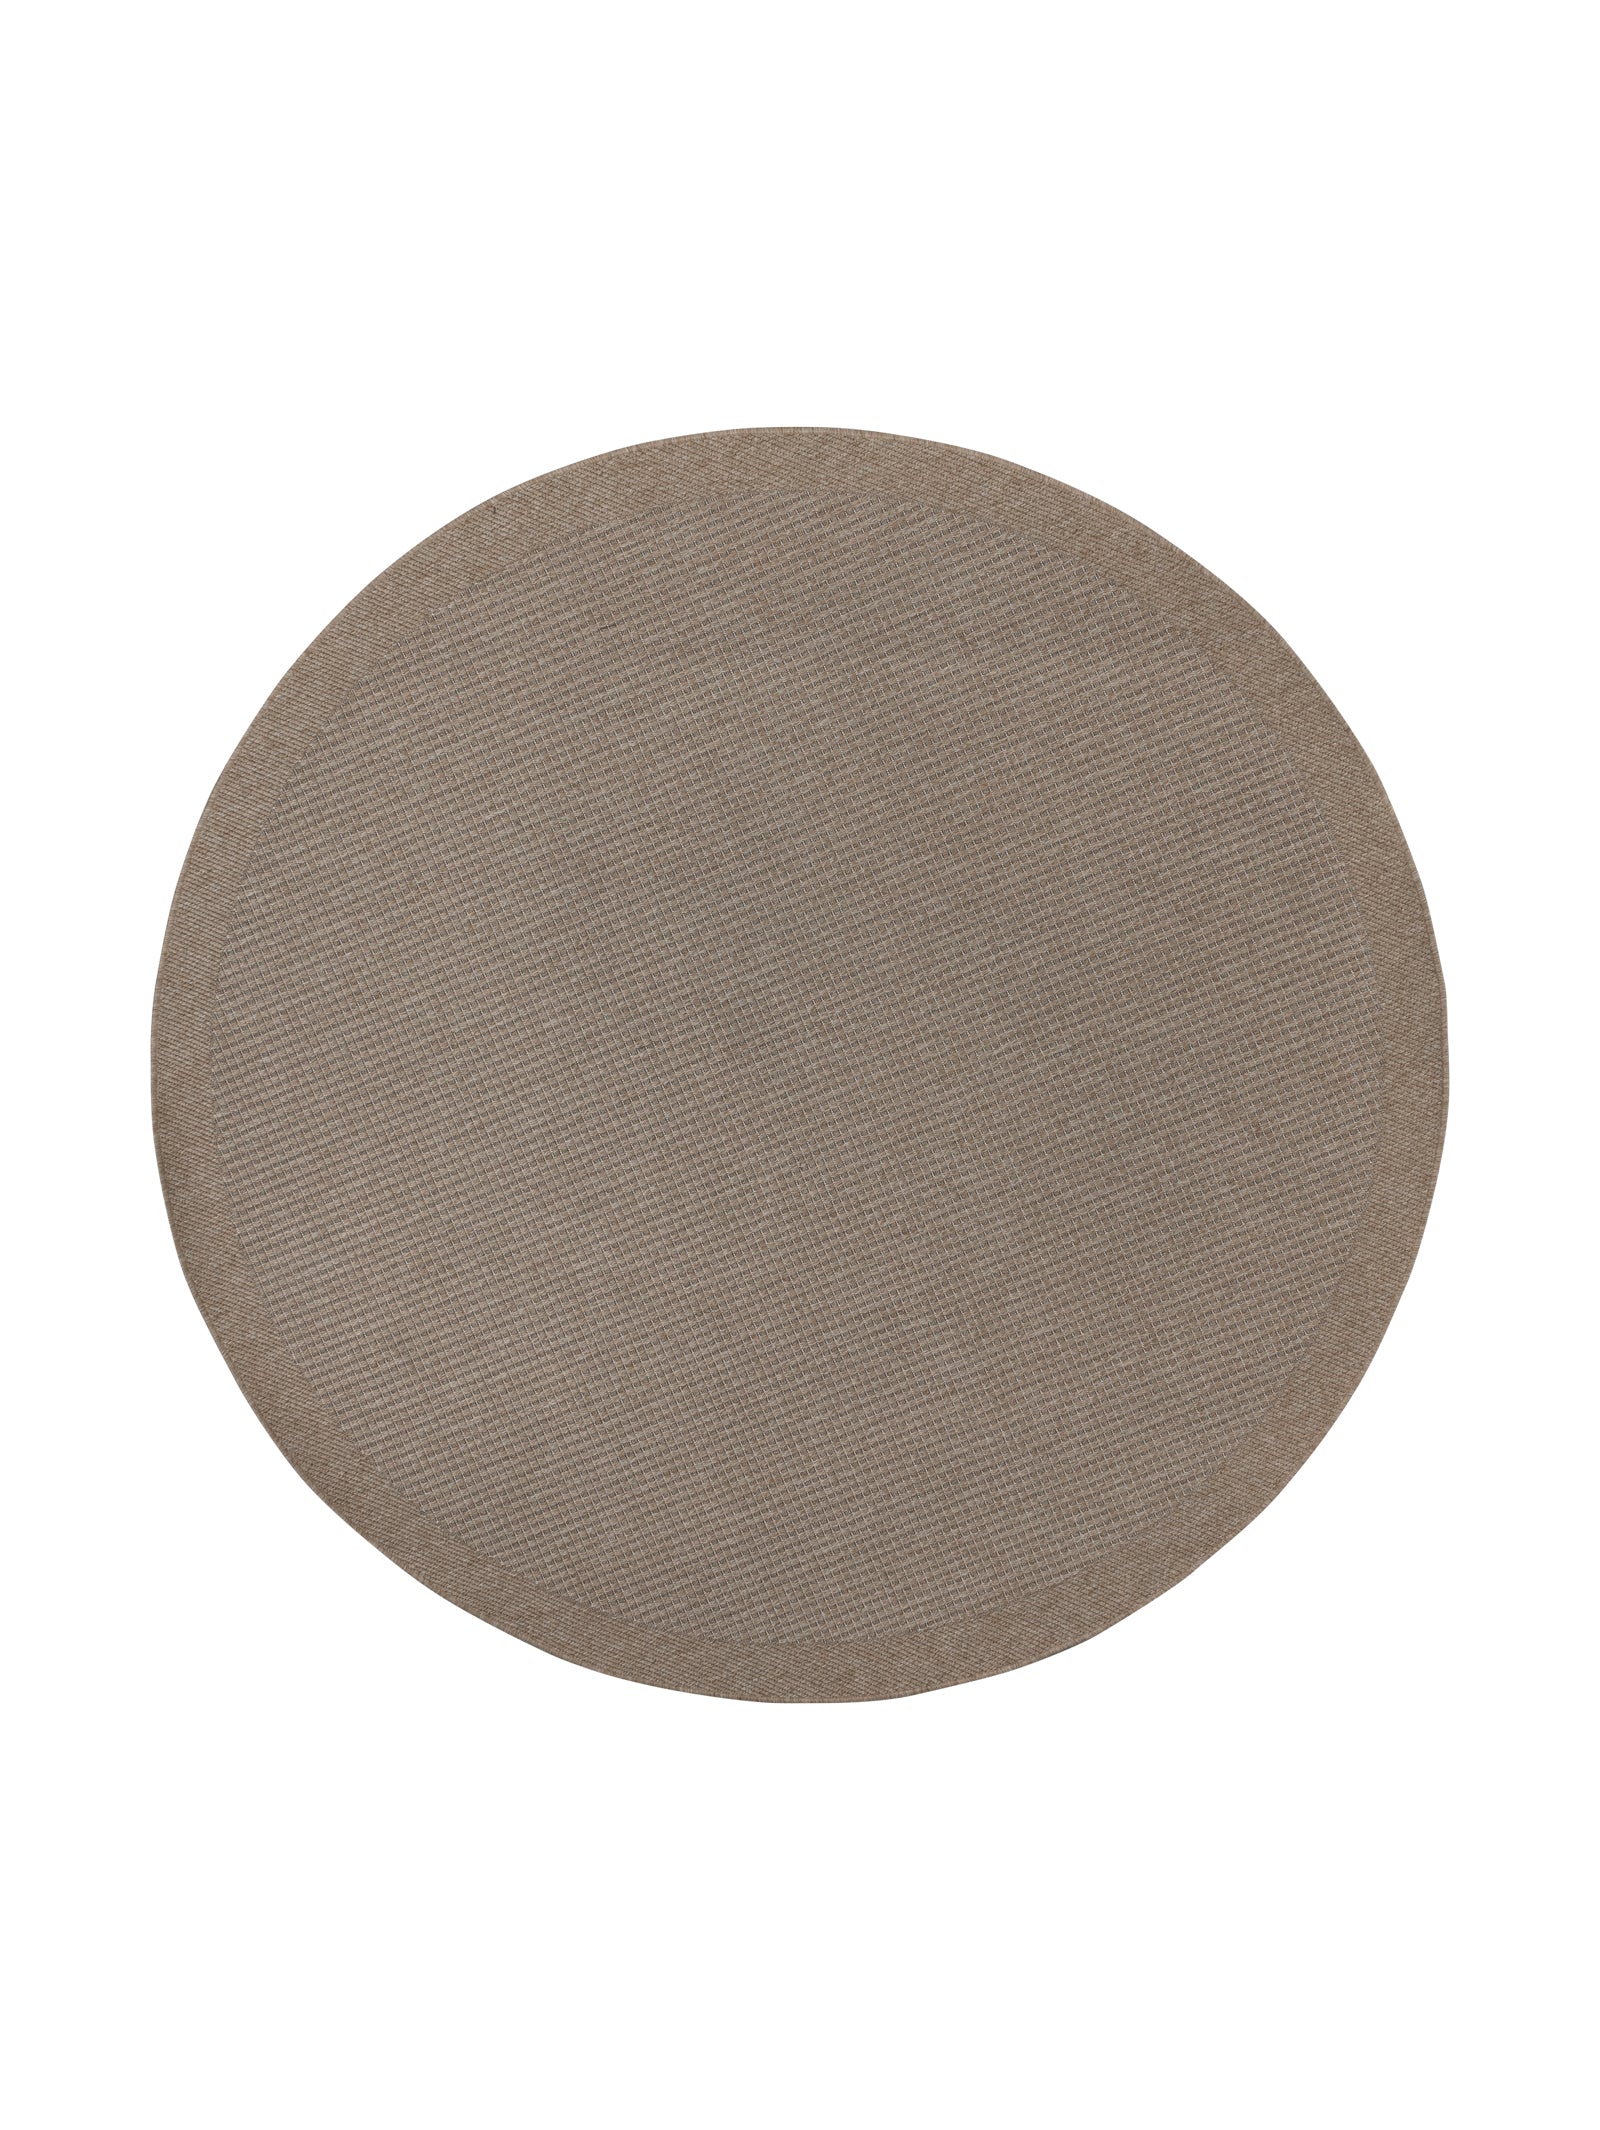 Foreshore Outdoor Round Rug in Seasand